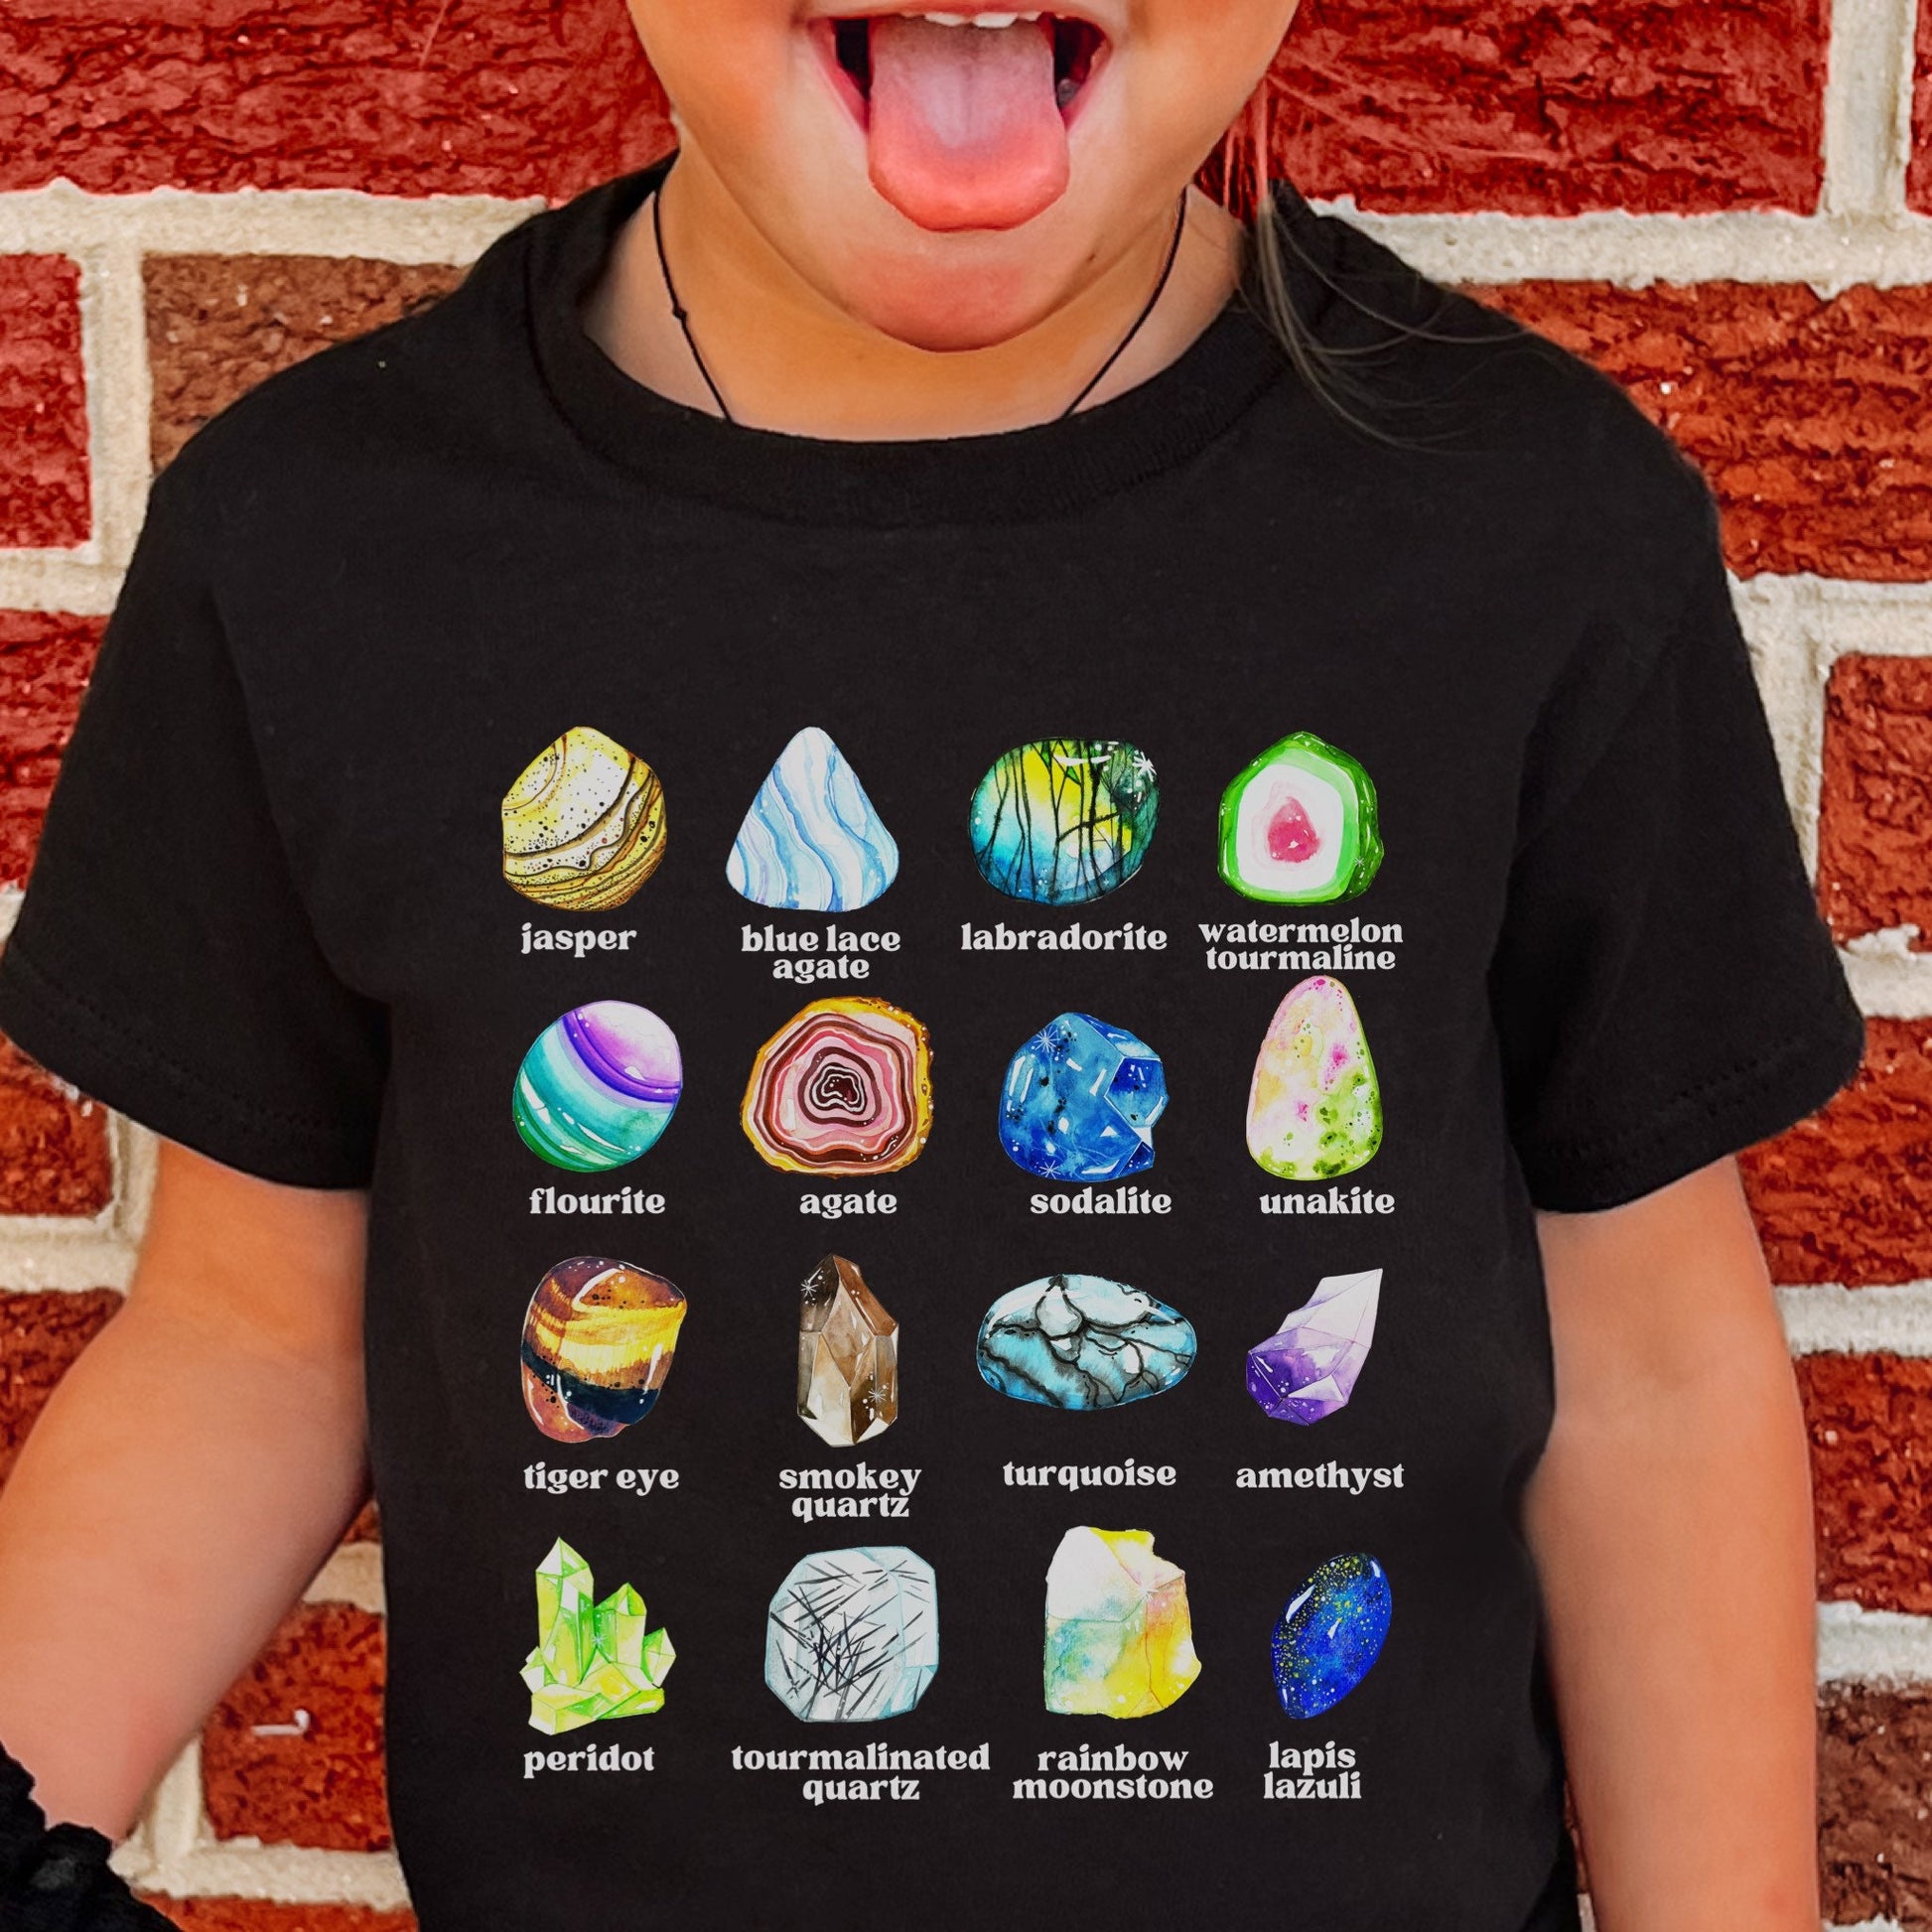 Kids Crystal T-shirts, Crystal Shirt For Toddlers, Gem and Mineral Shirt, Educational Gift Interactive Shirt For Kids, Mystical Shirt Girl